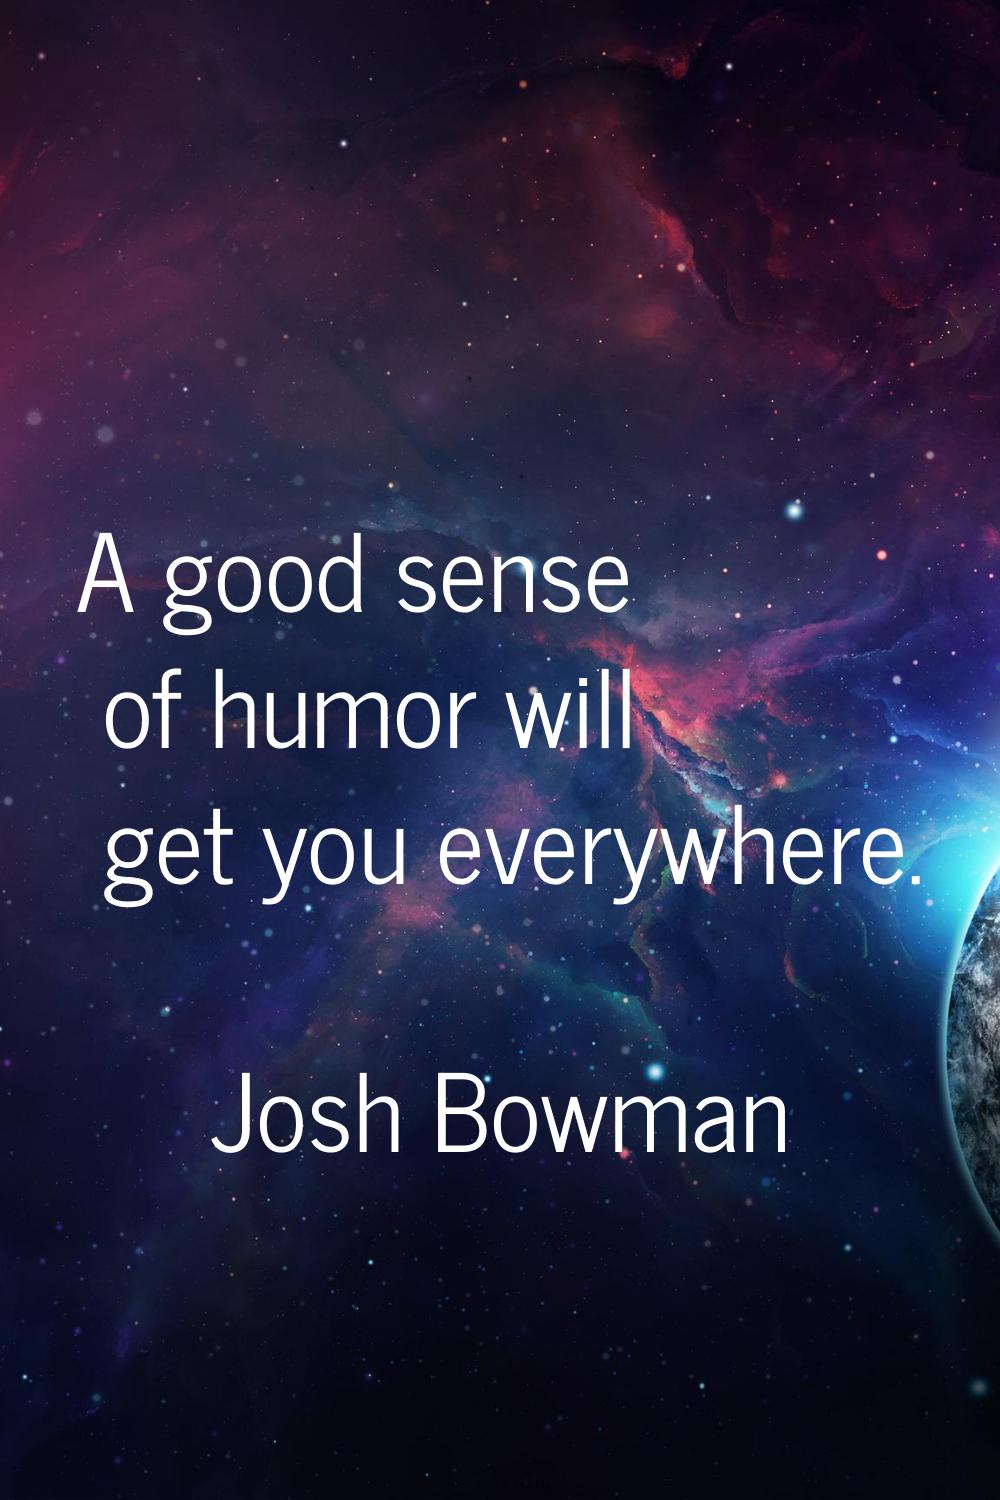 A good sense of humor will get you everywhere.